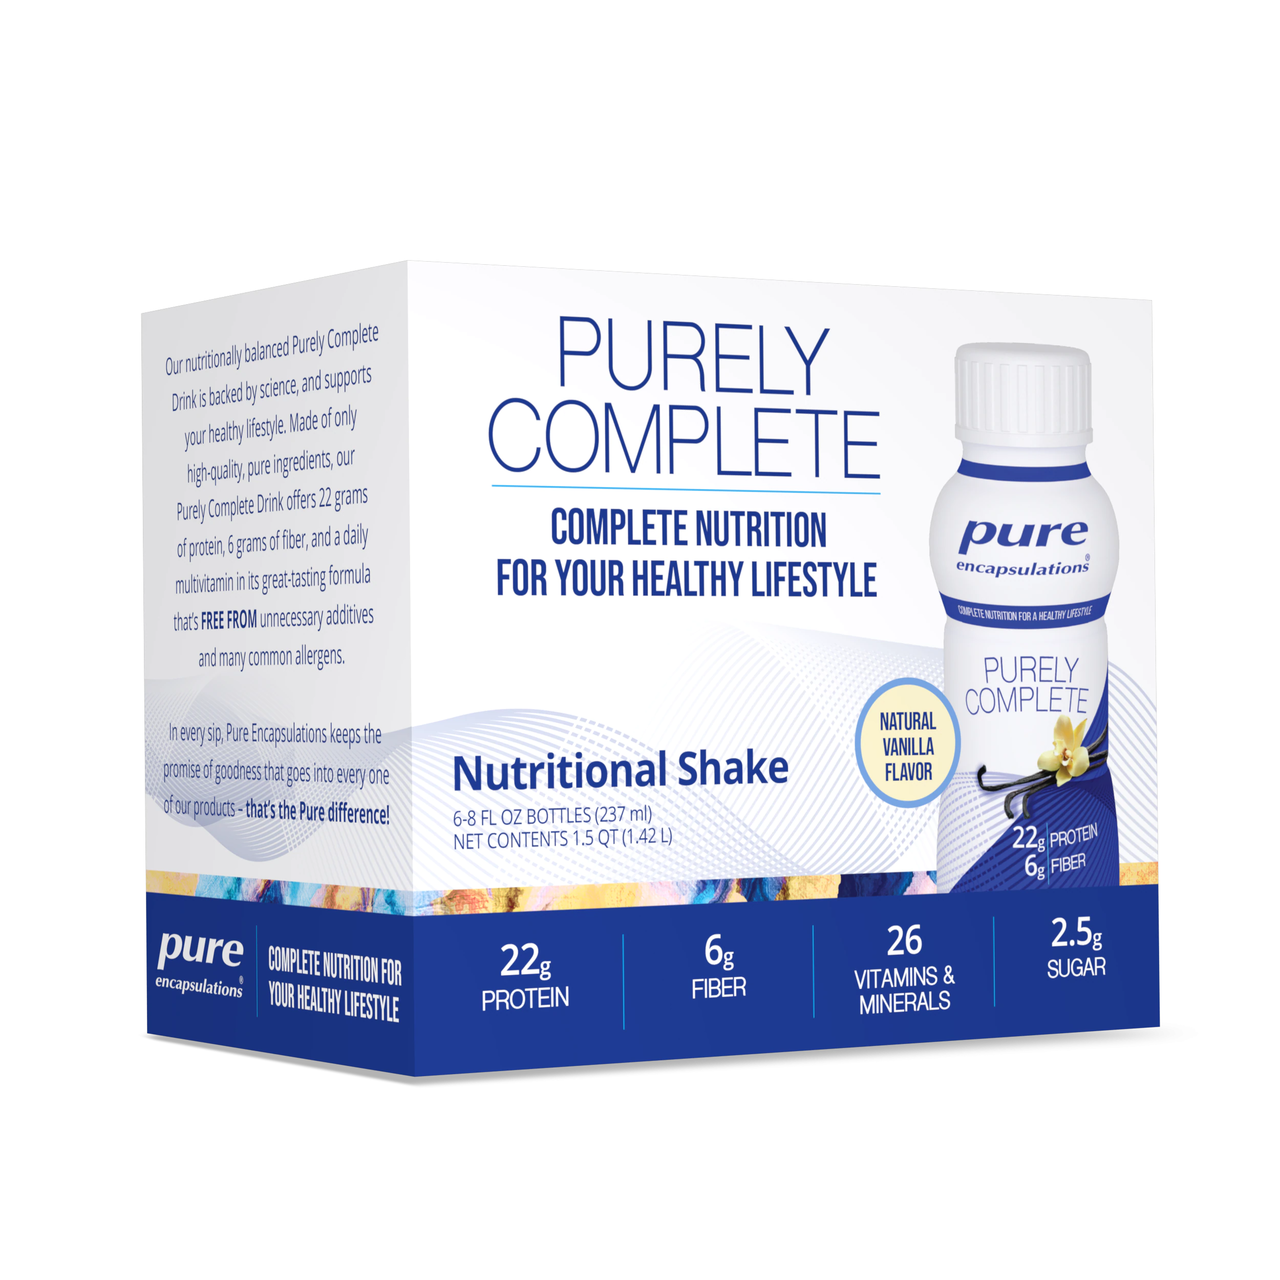 PurelyCompleteVanilla6pack